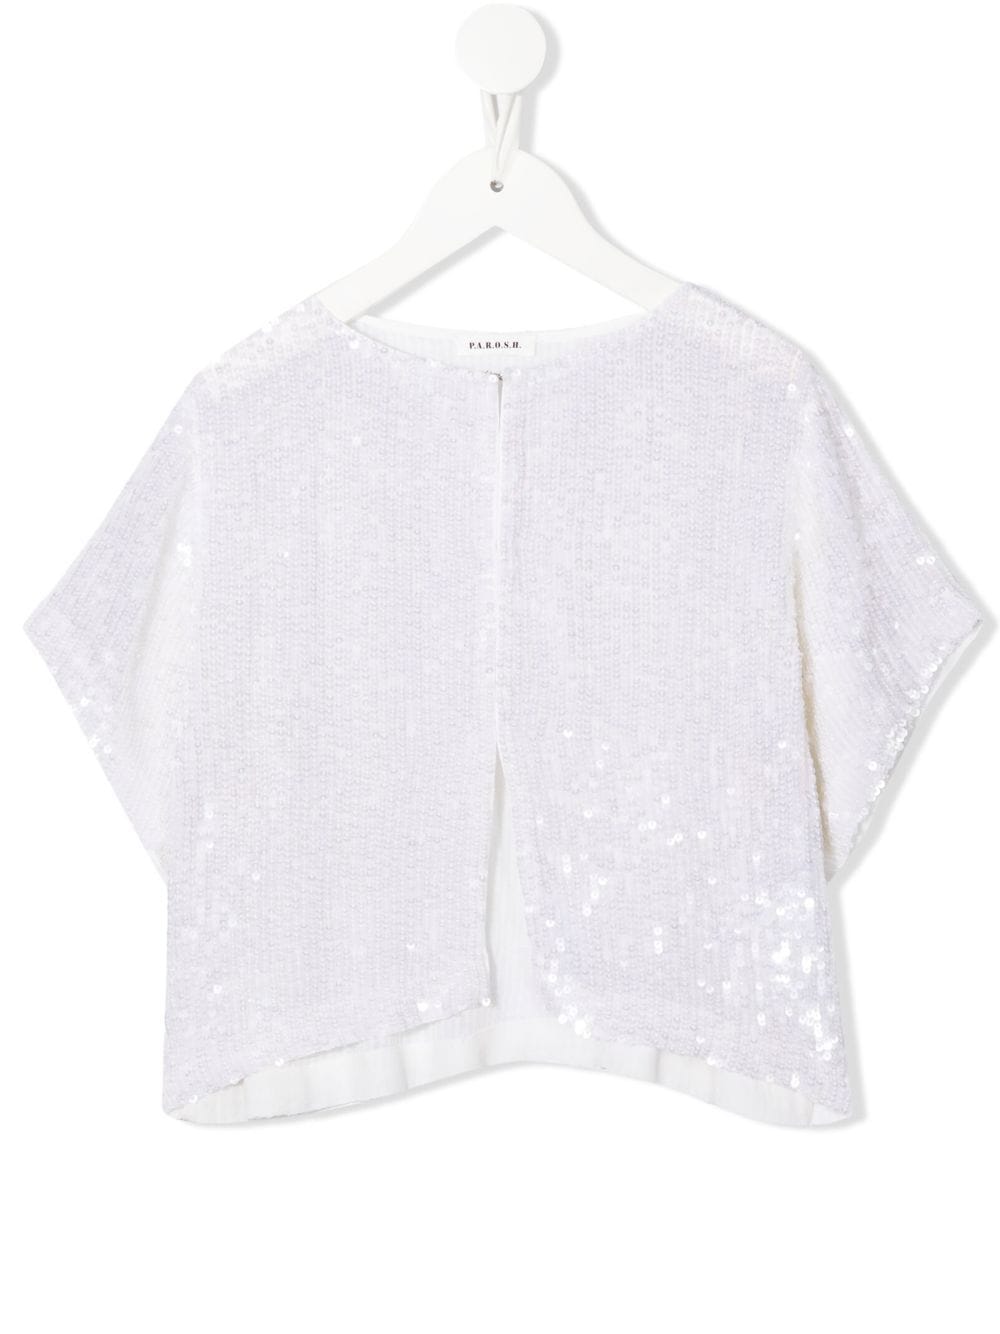 P.A.R.O.S.H. sequin-embellished wide-sleeve jacket - White von P.A.R.O.S.H.